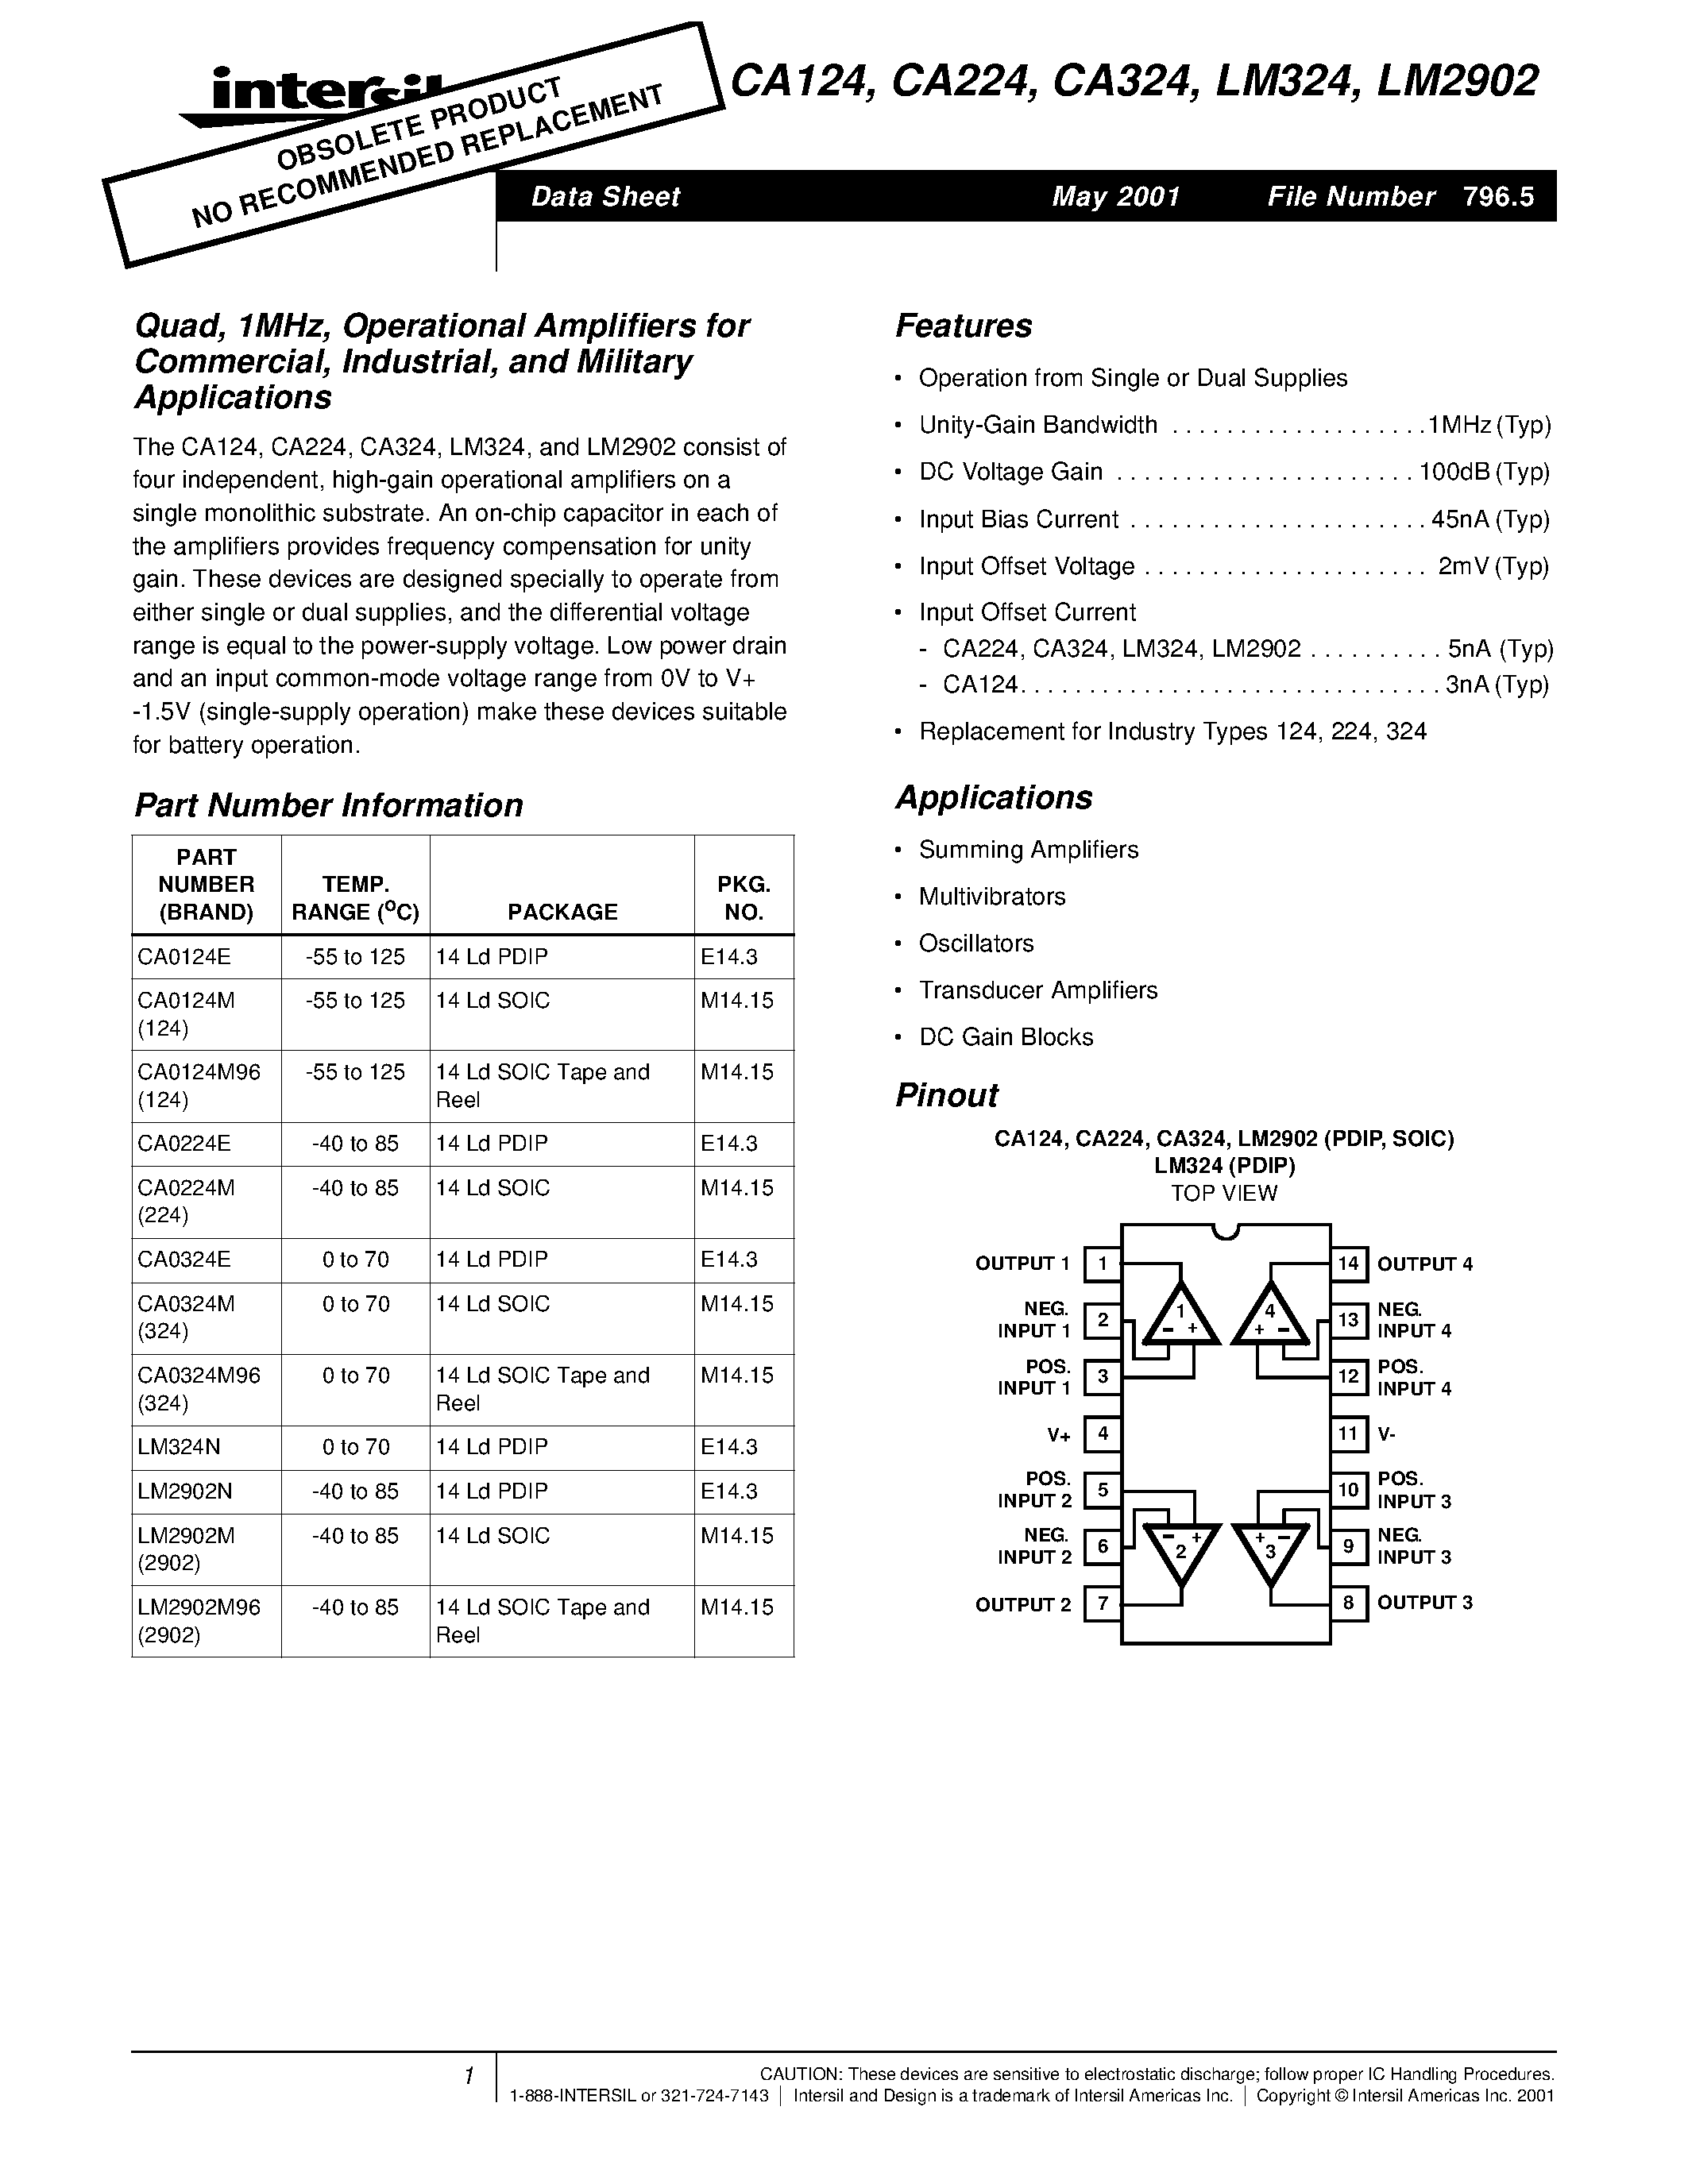 Datasheet CA124 - Operational Amplifiers for Commercial / Industrial and Military Applications page 1